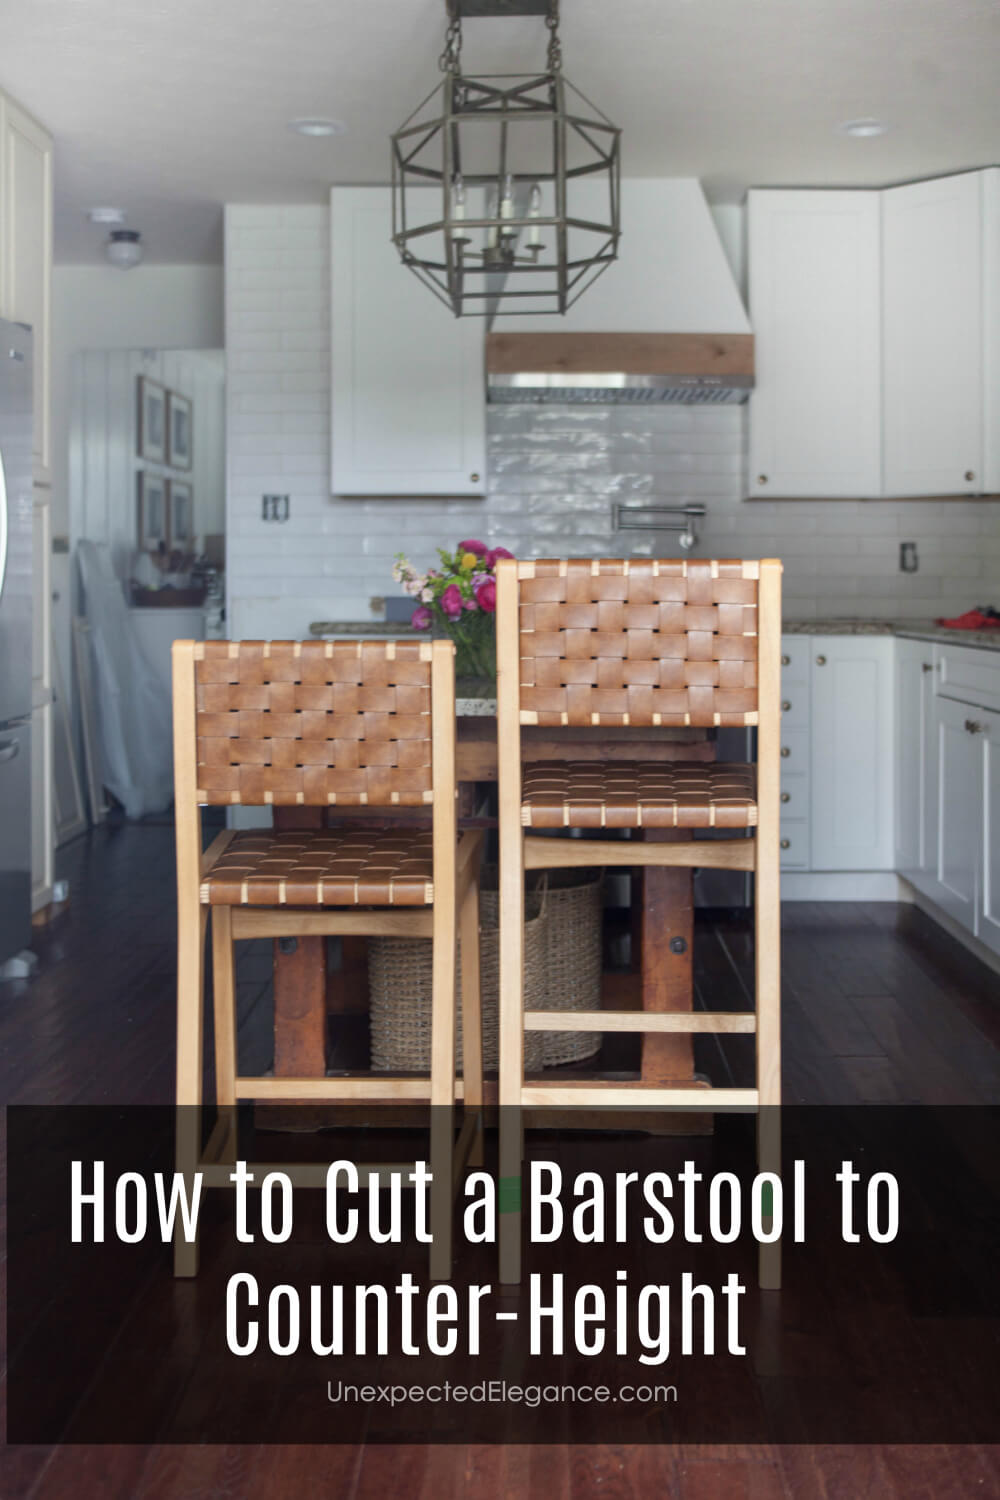 How To Cut A Barstool Counter Height, How To Cut Bar Stool Legs Shorter